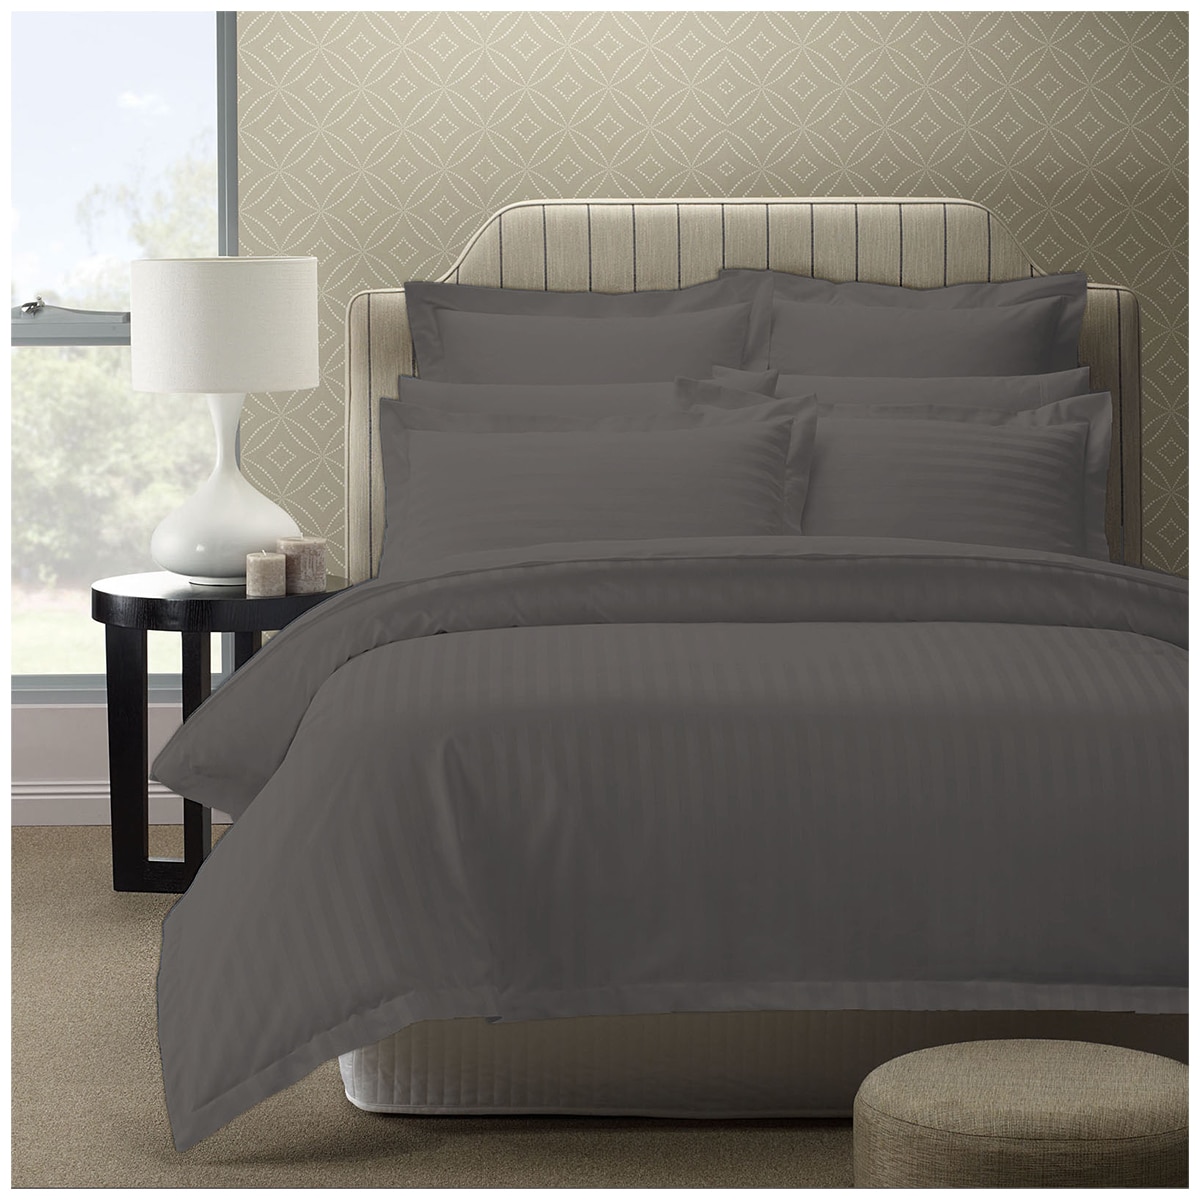 Bdirect Royal Comfort 1200 Thread Count Damask Stripe Cotton Blend Sheet Set- Queen Charcoal Grey